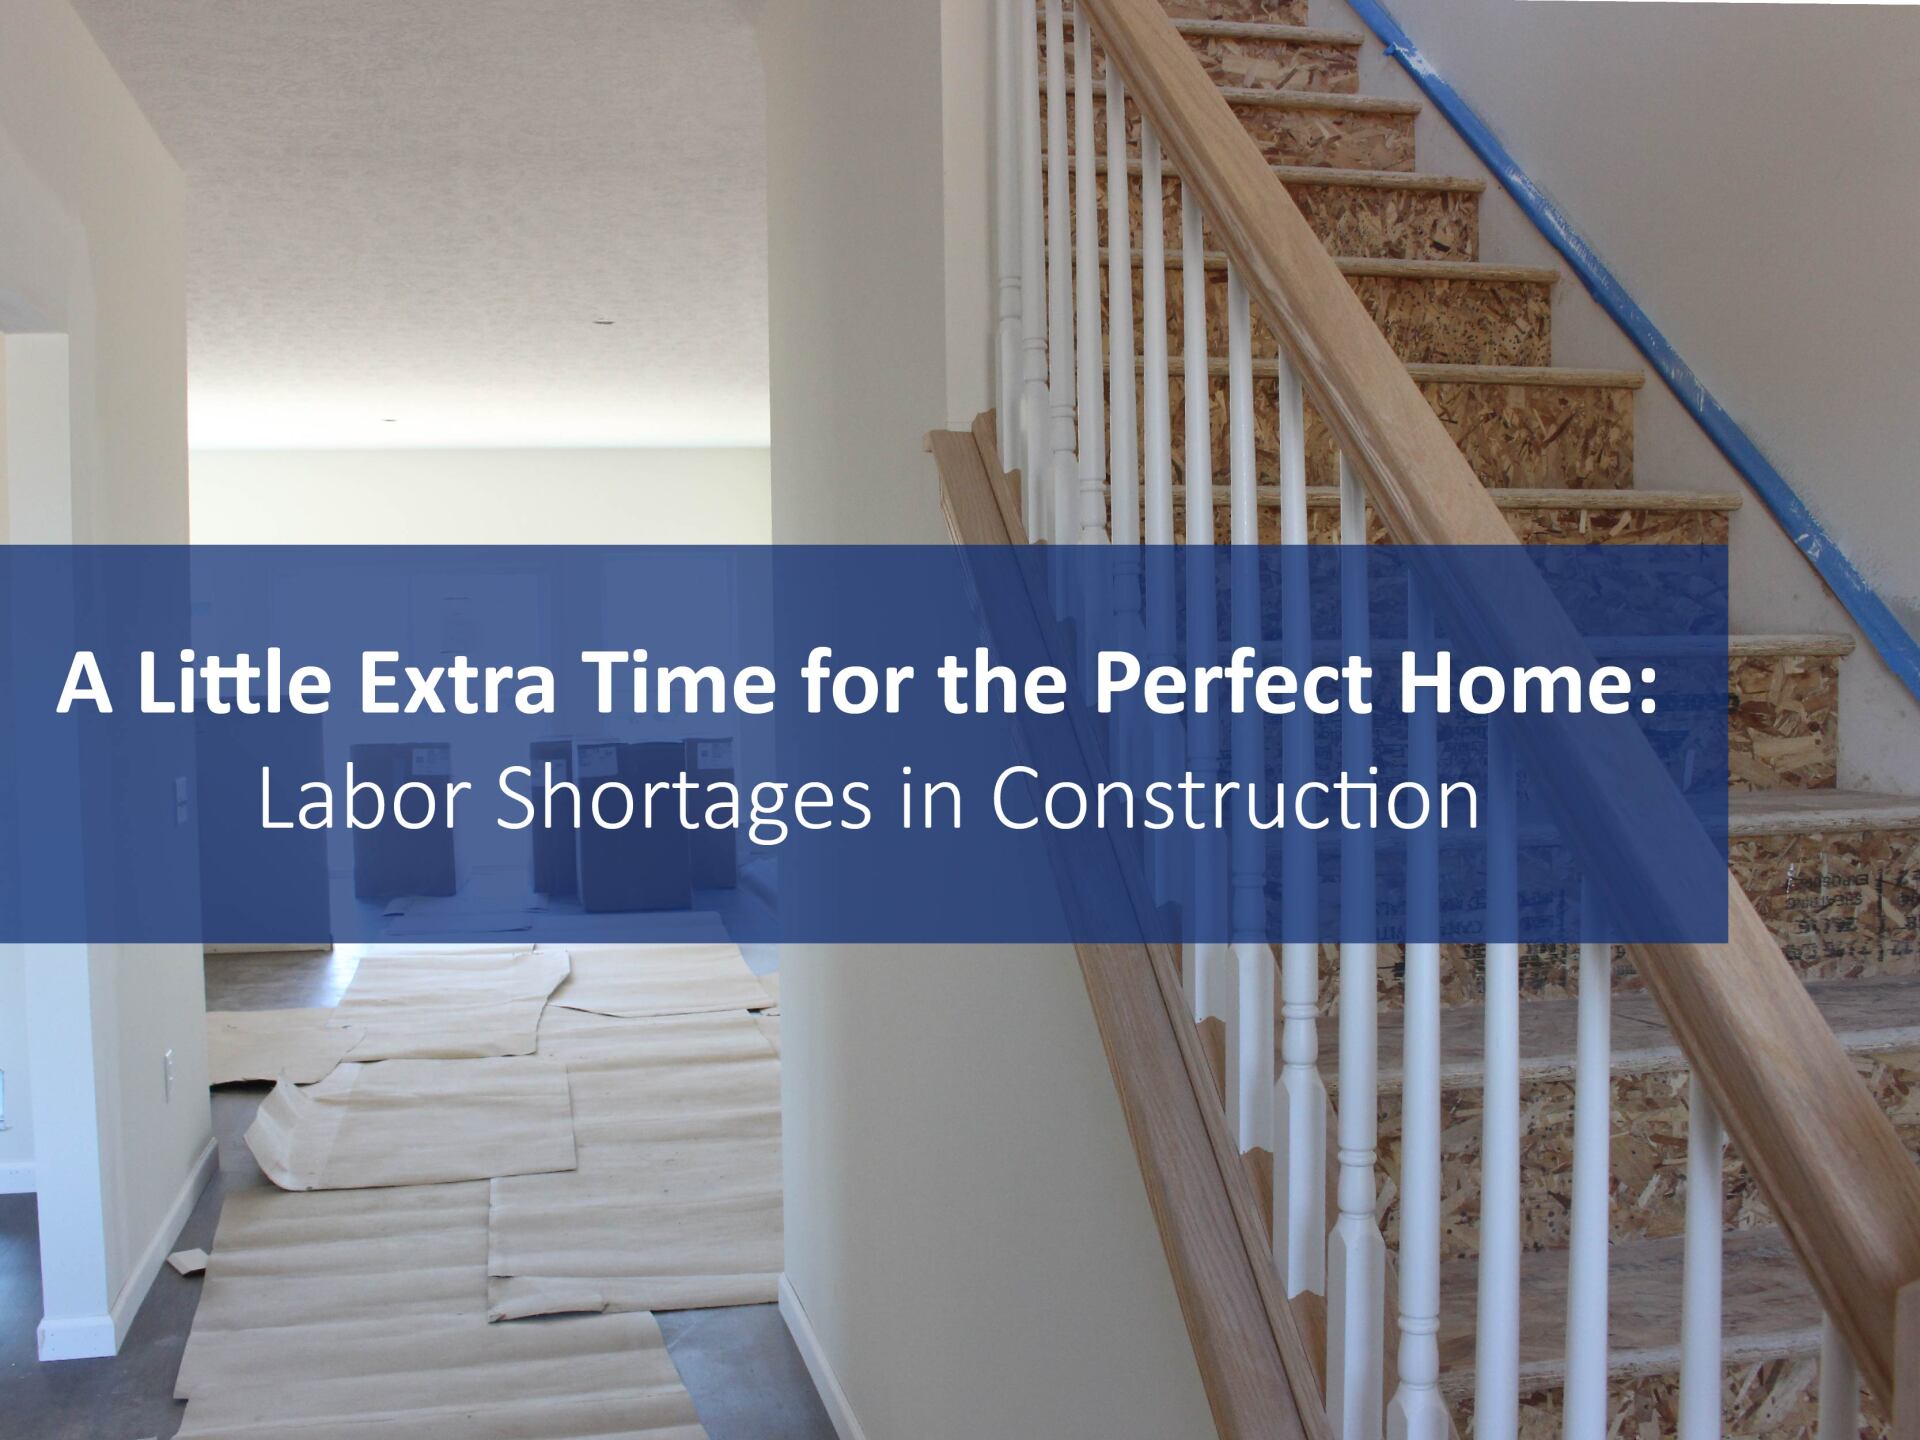 A Little Extra Time for the Perfect Home